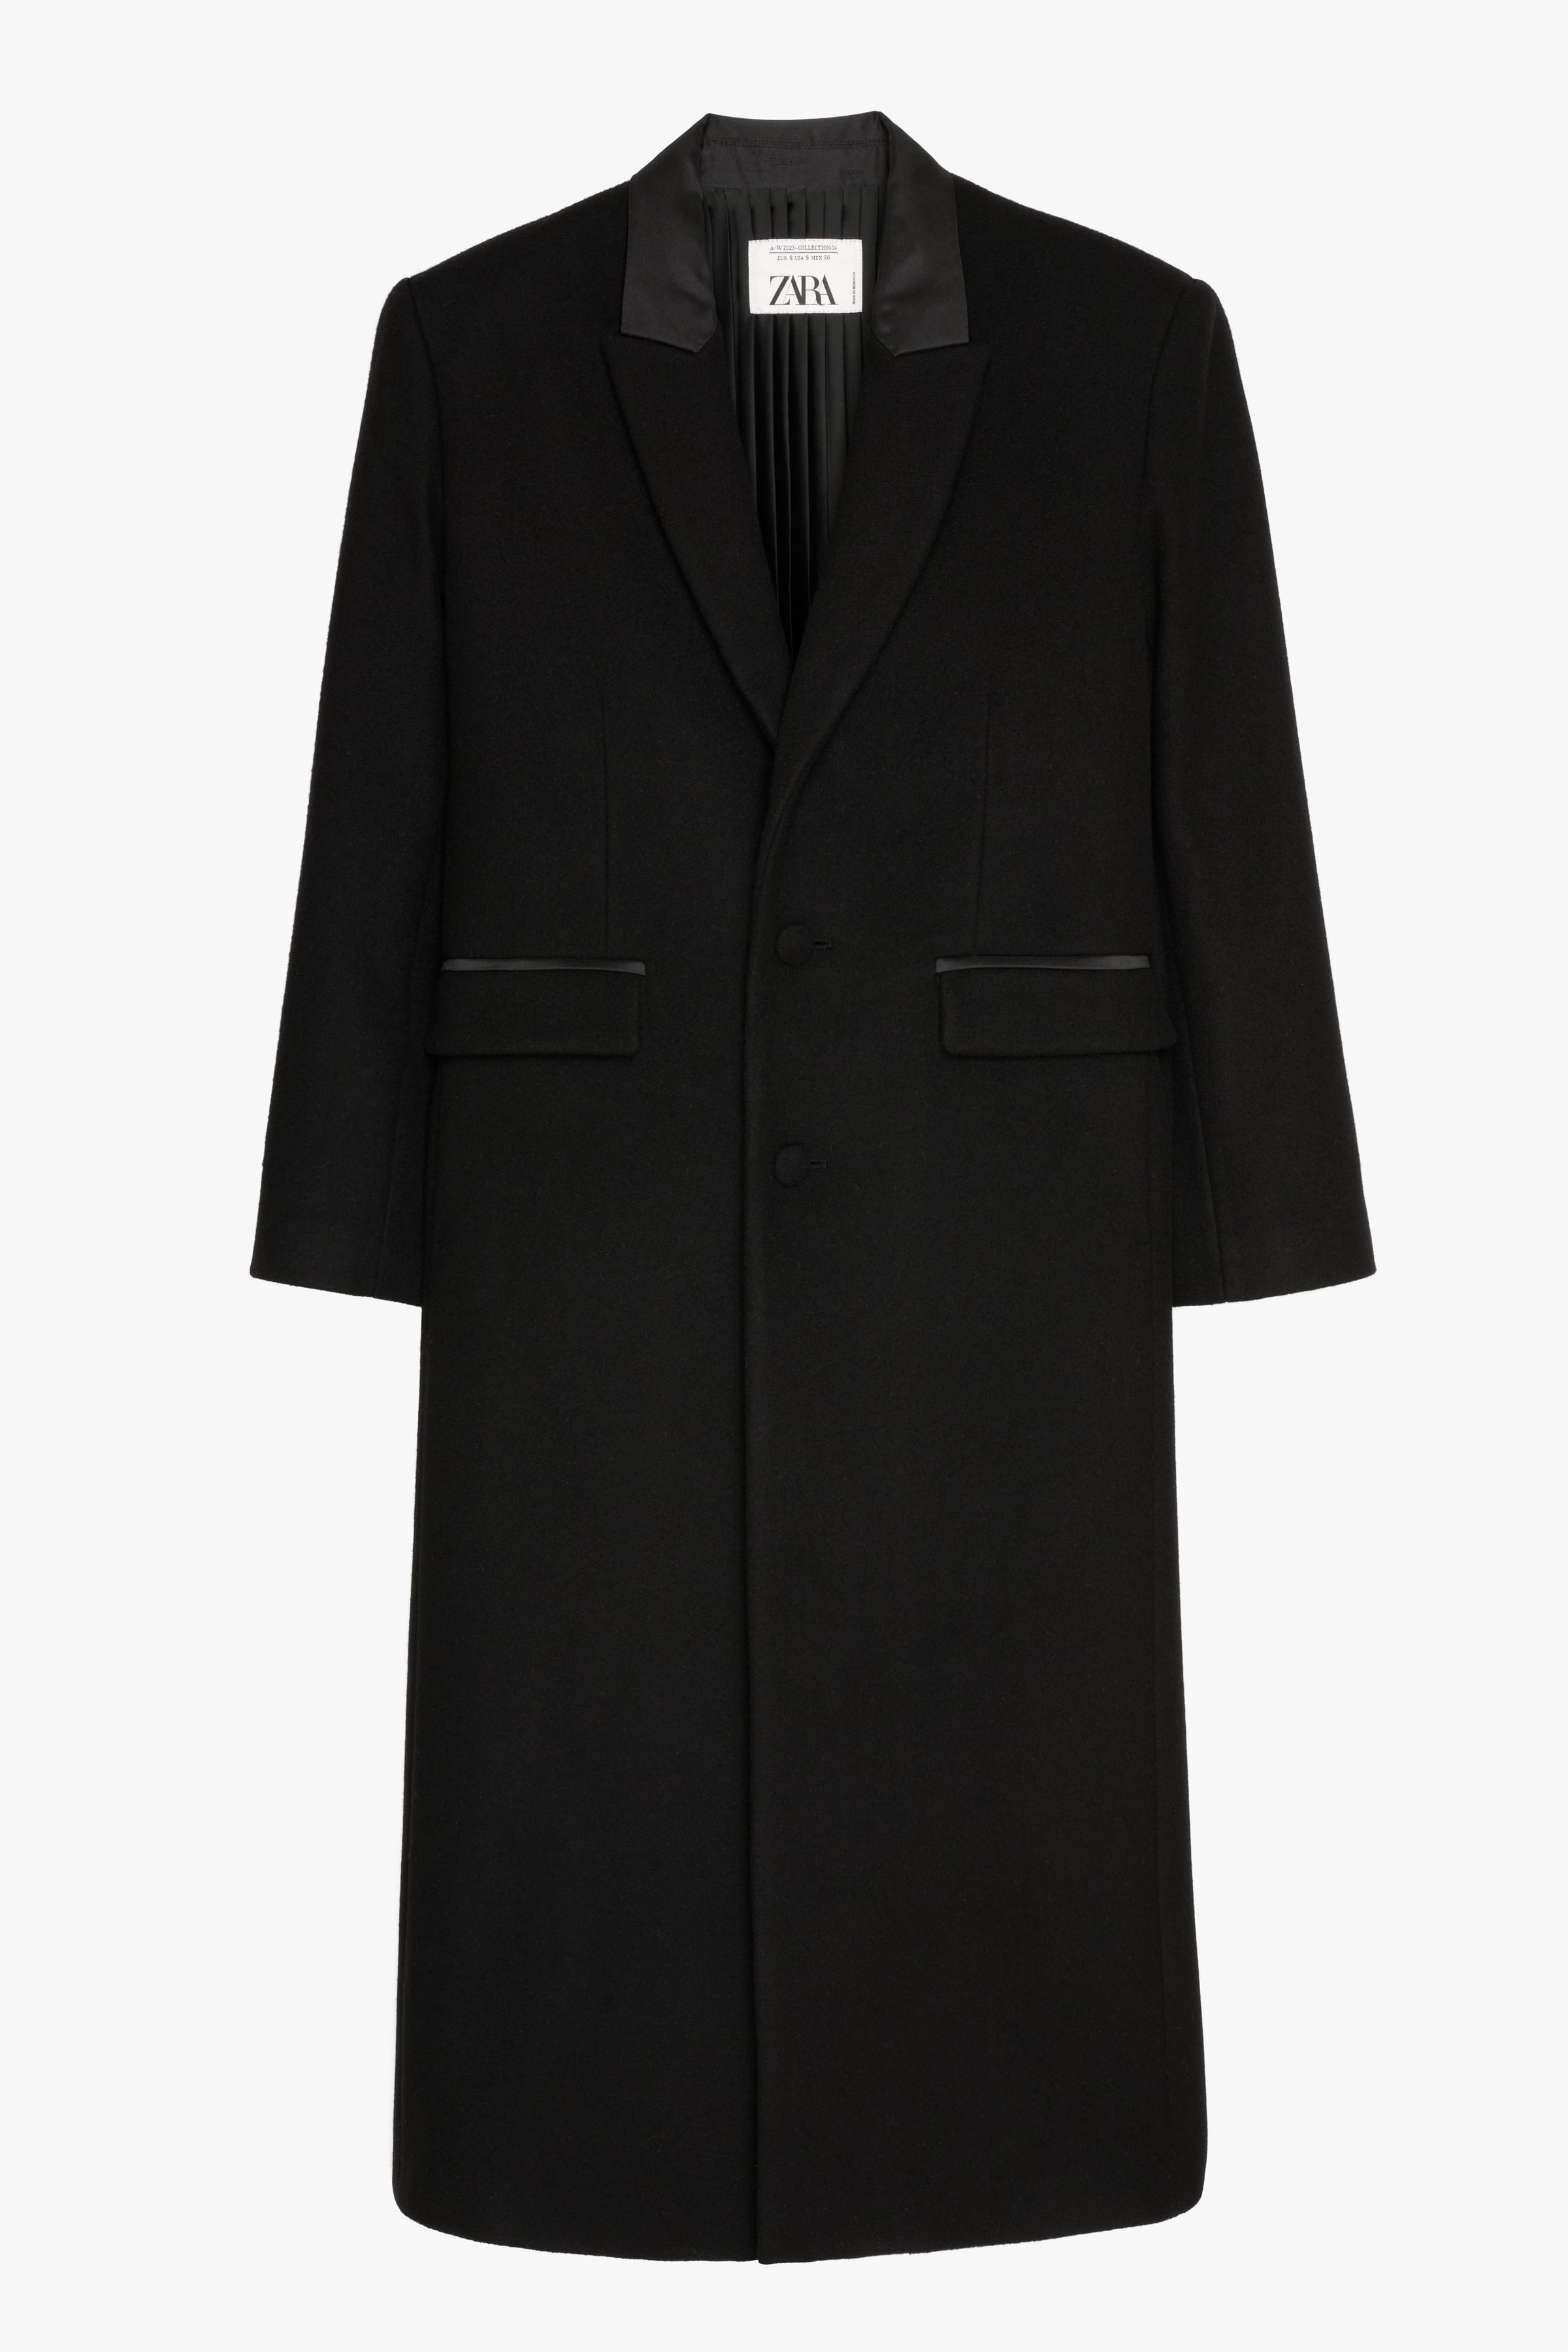 Zara WOOL COAT WITH PLEATED LINING LIMITED EDITION | Mall of America®